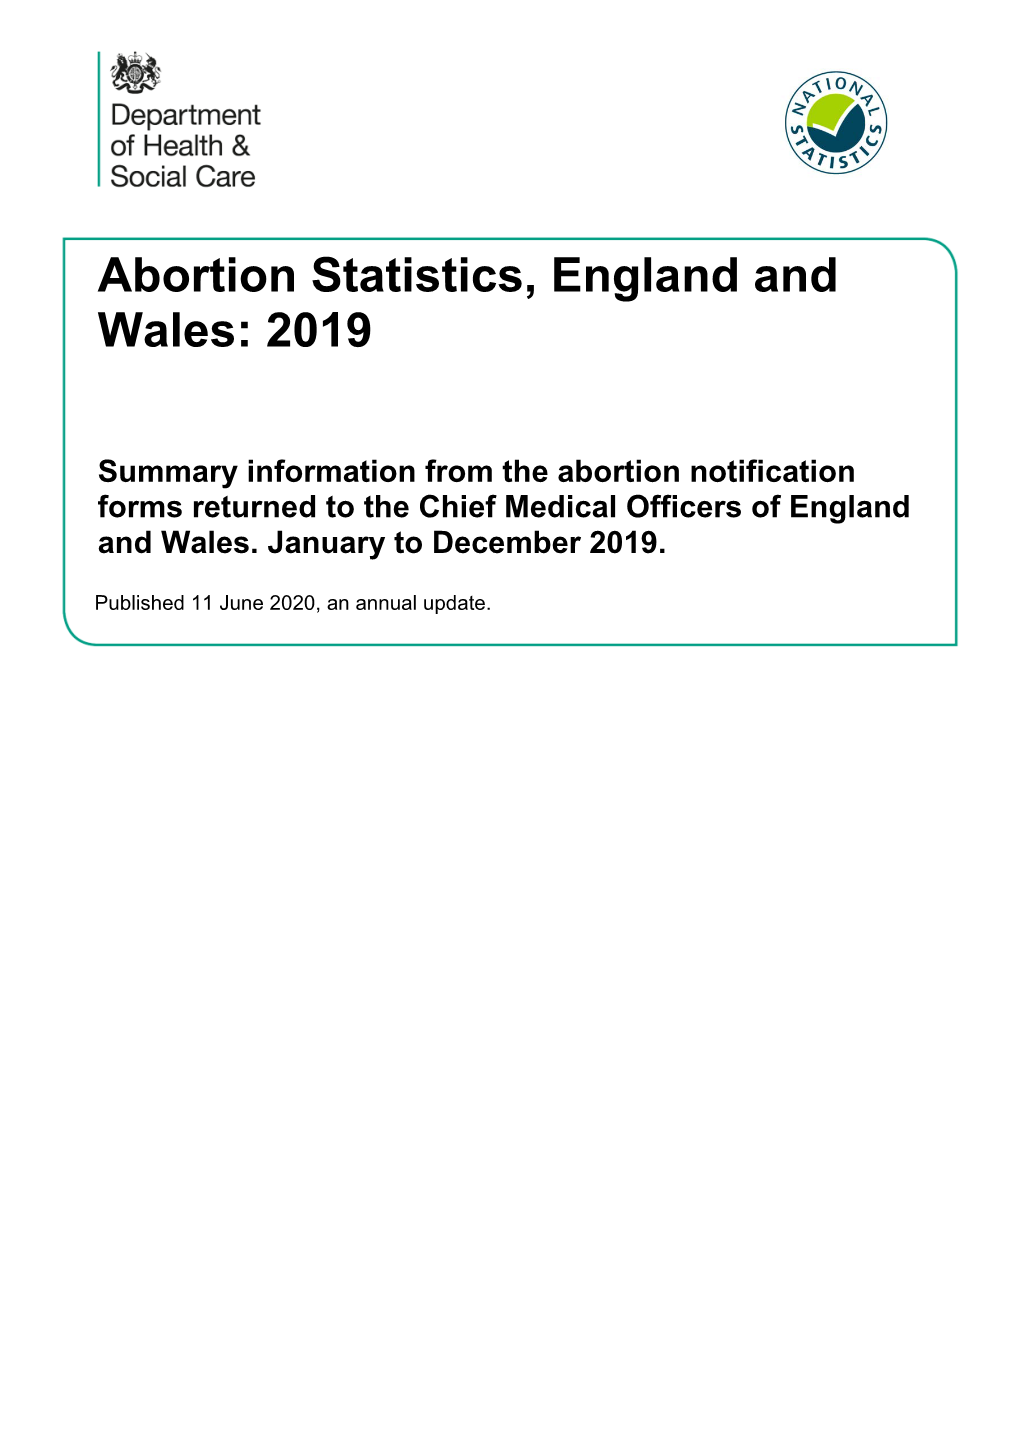 Abortion Statistics, England and Wales: 2019